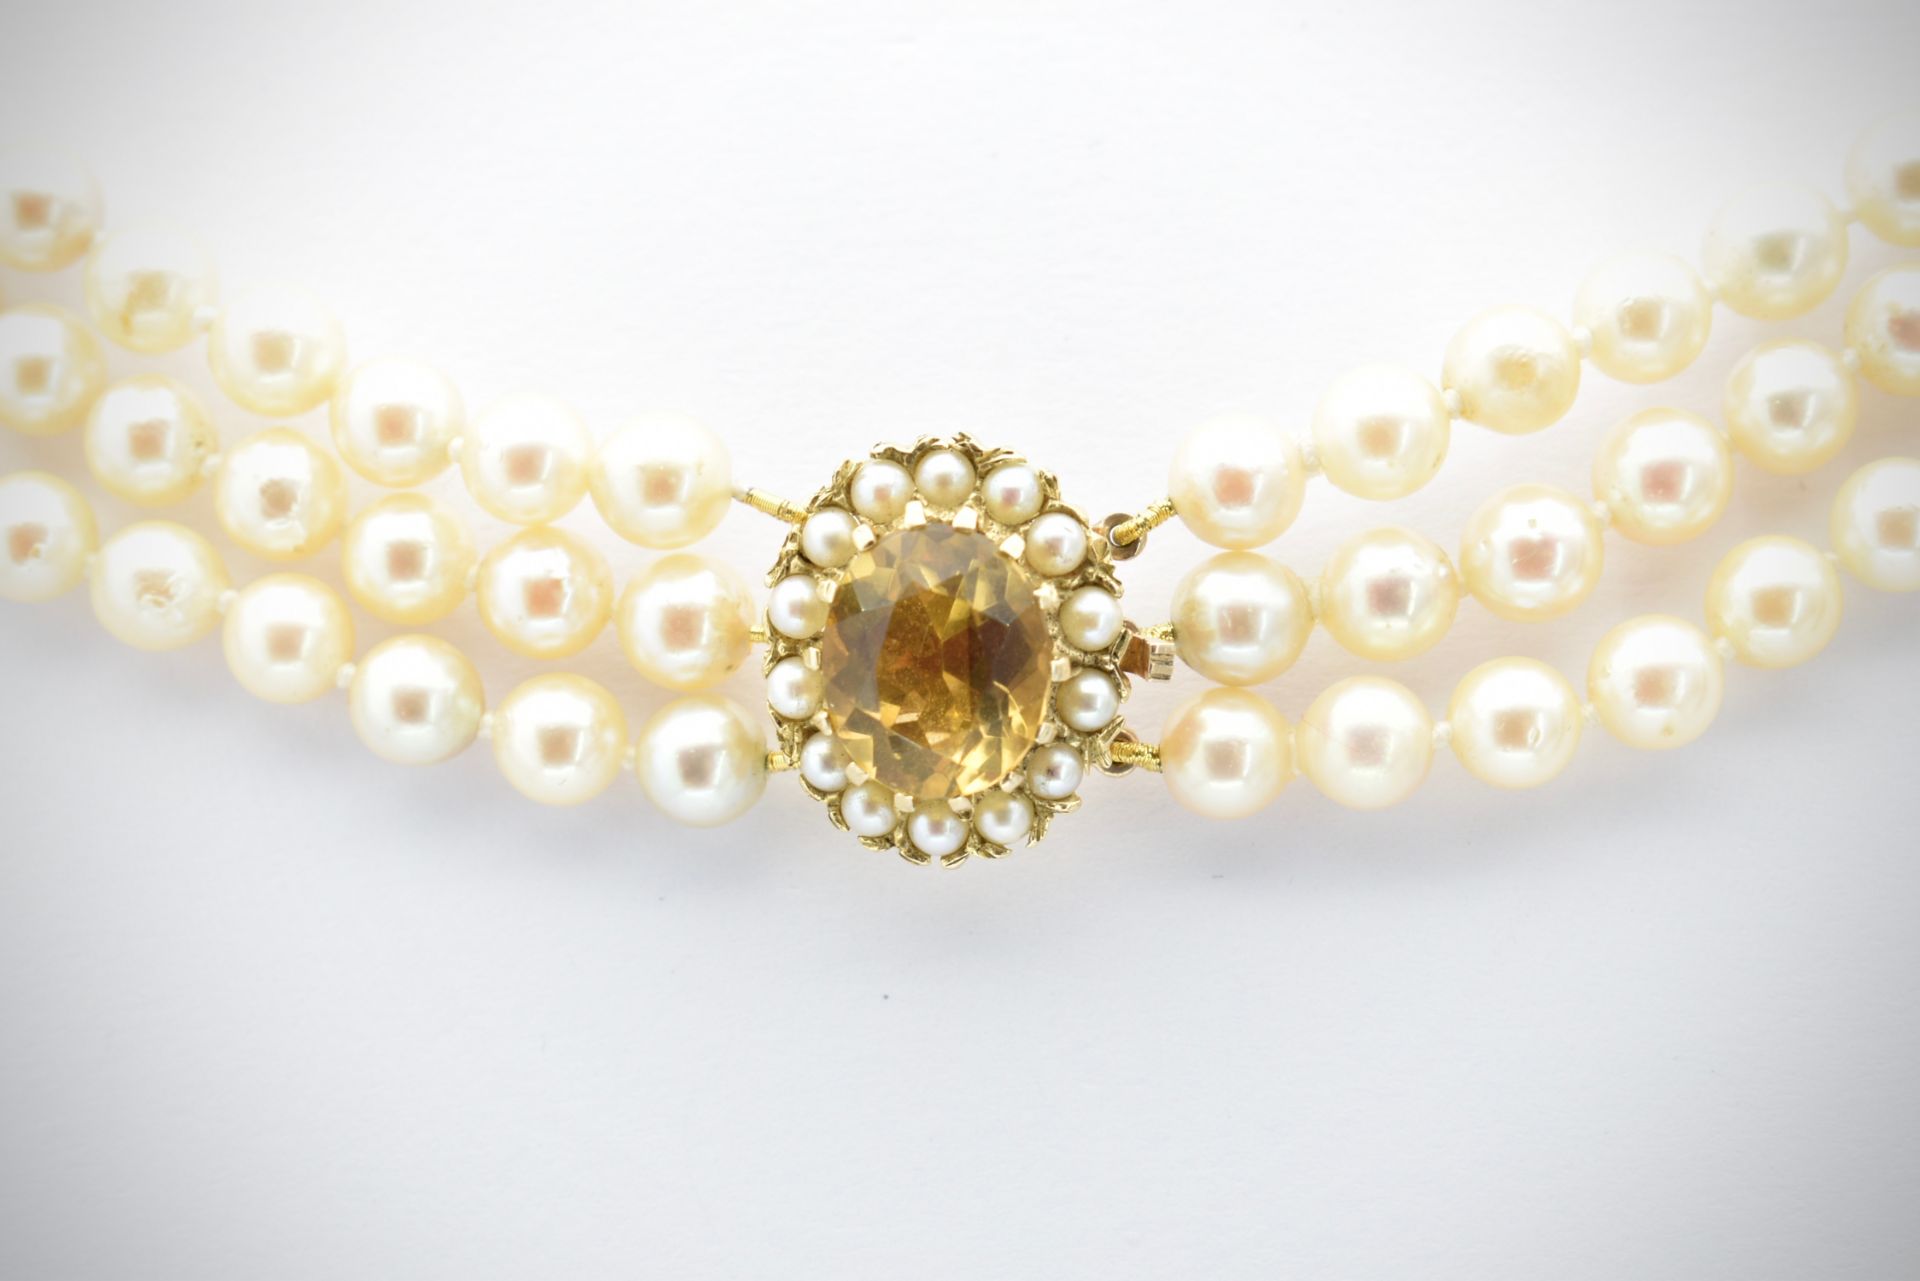 9ct Gold Citrine & Cultured Pearl Necklace - Image 4 of 6